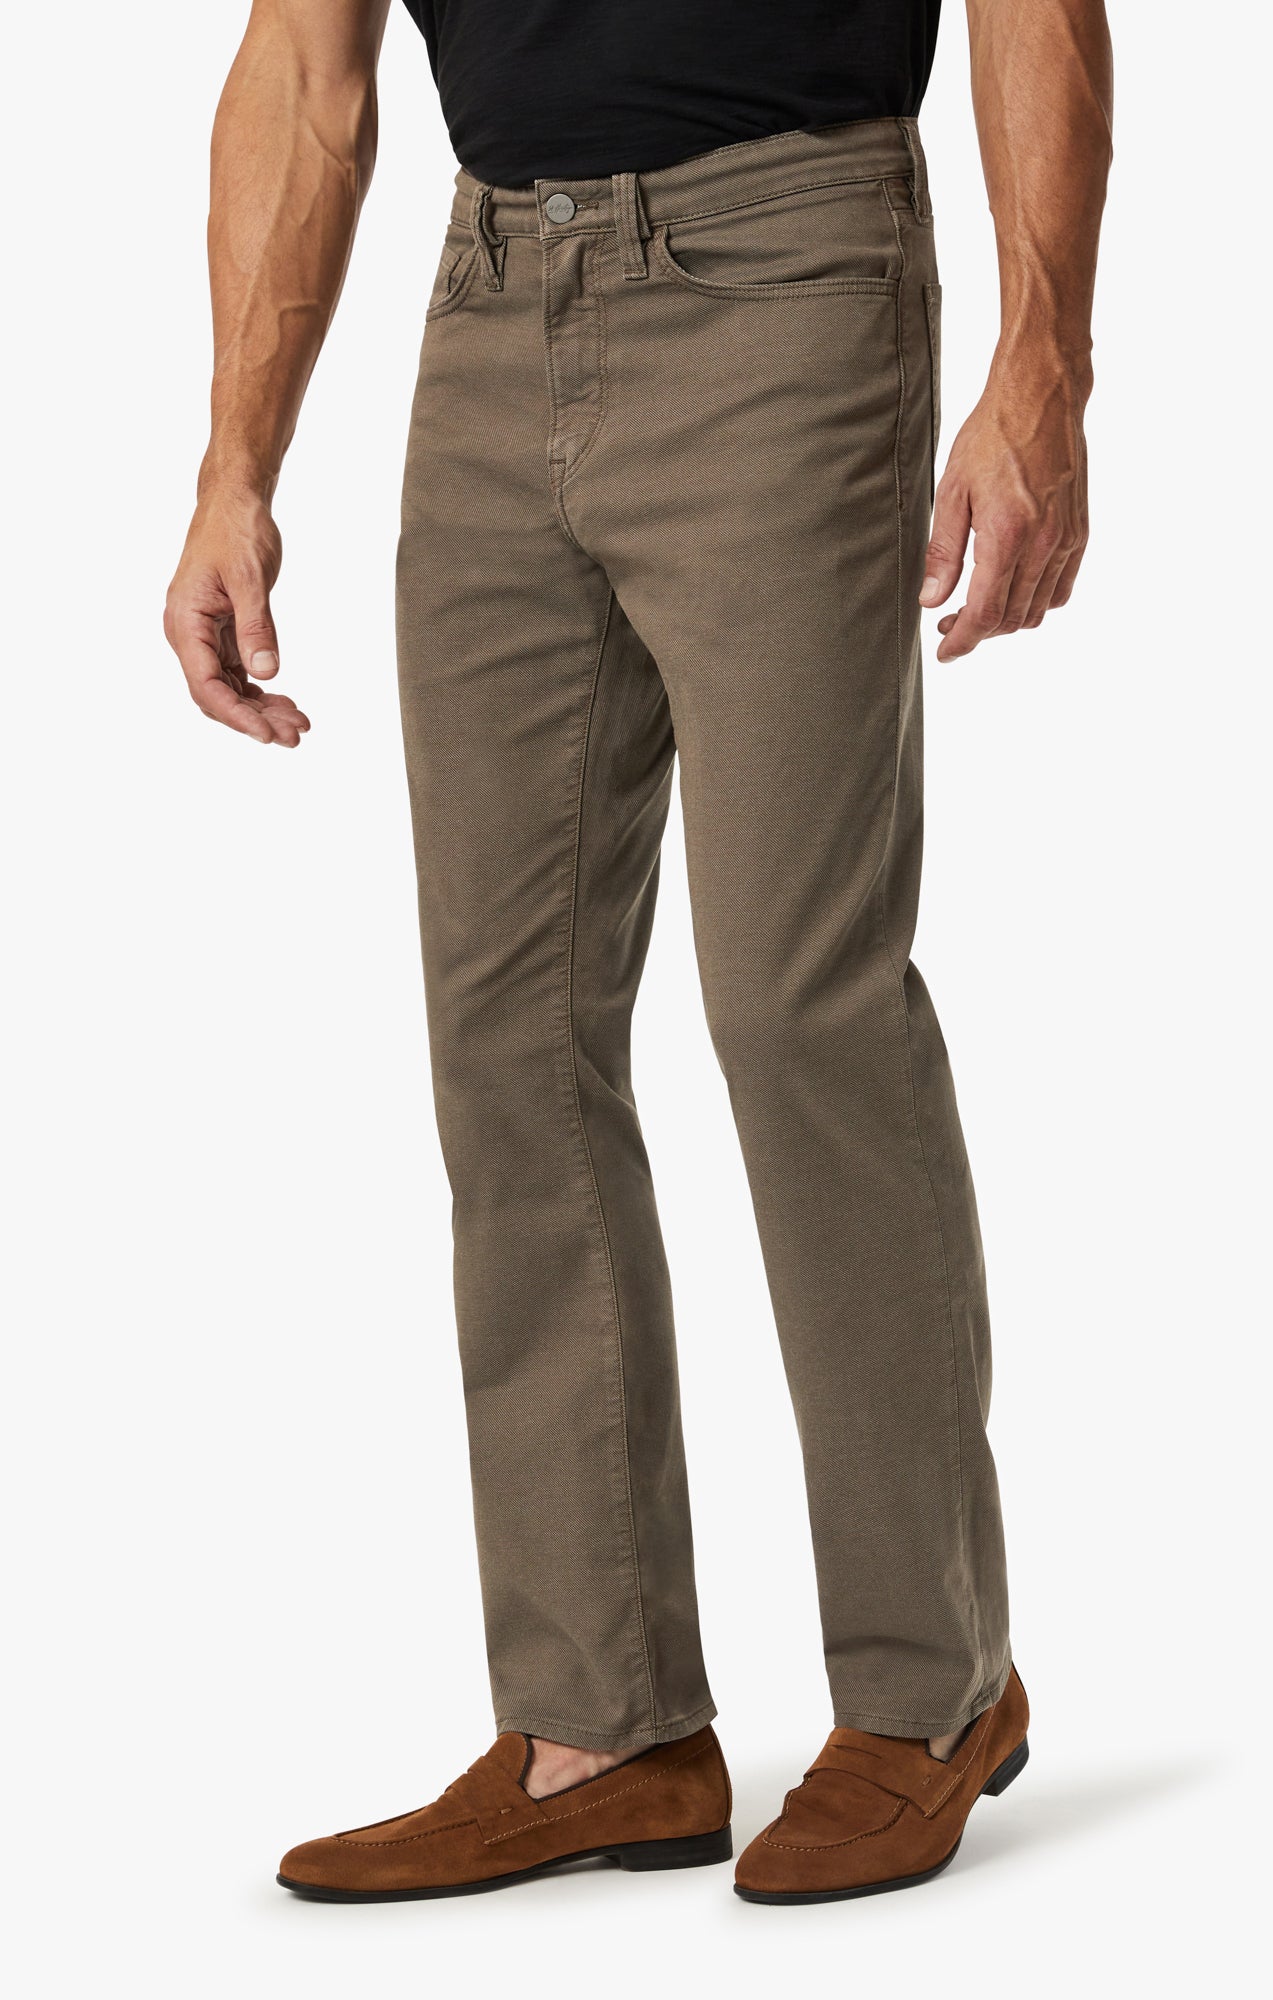 Charisma Relaxed Straight Pants In Canteen CoolMax Image 3